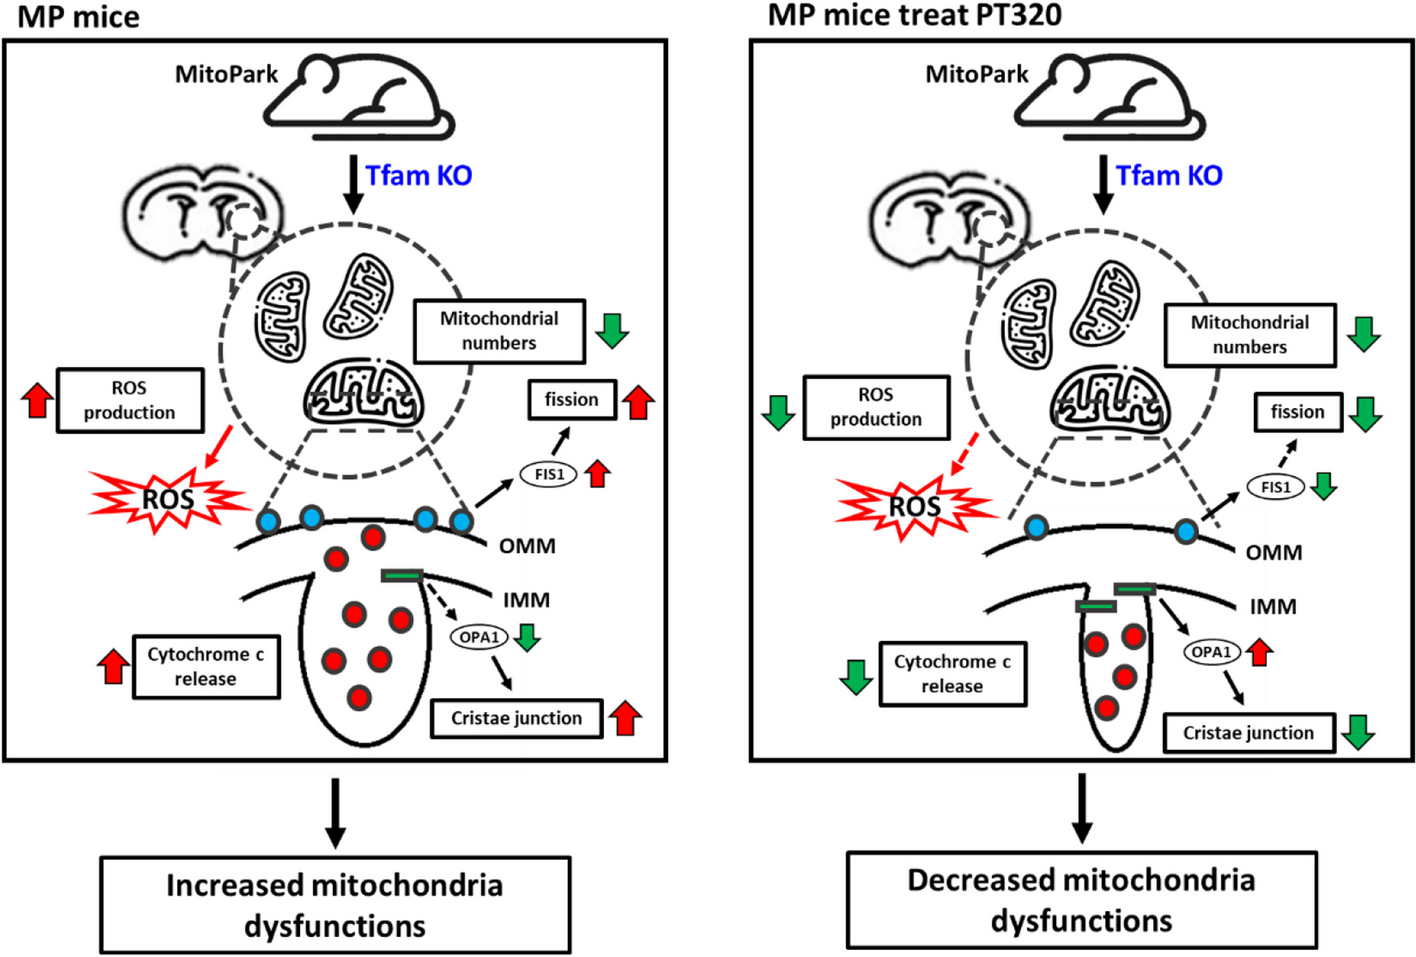 Attenuating mitochondrial dysfunction and morphological disruption with PT320 delays dopamine degeneration in MitoPark mice